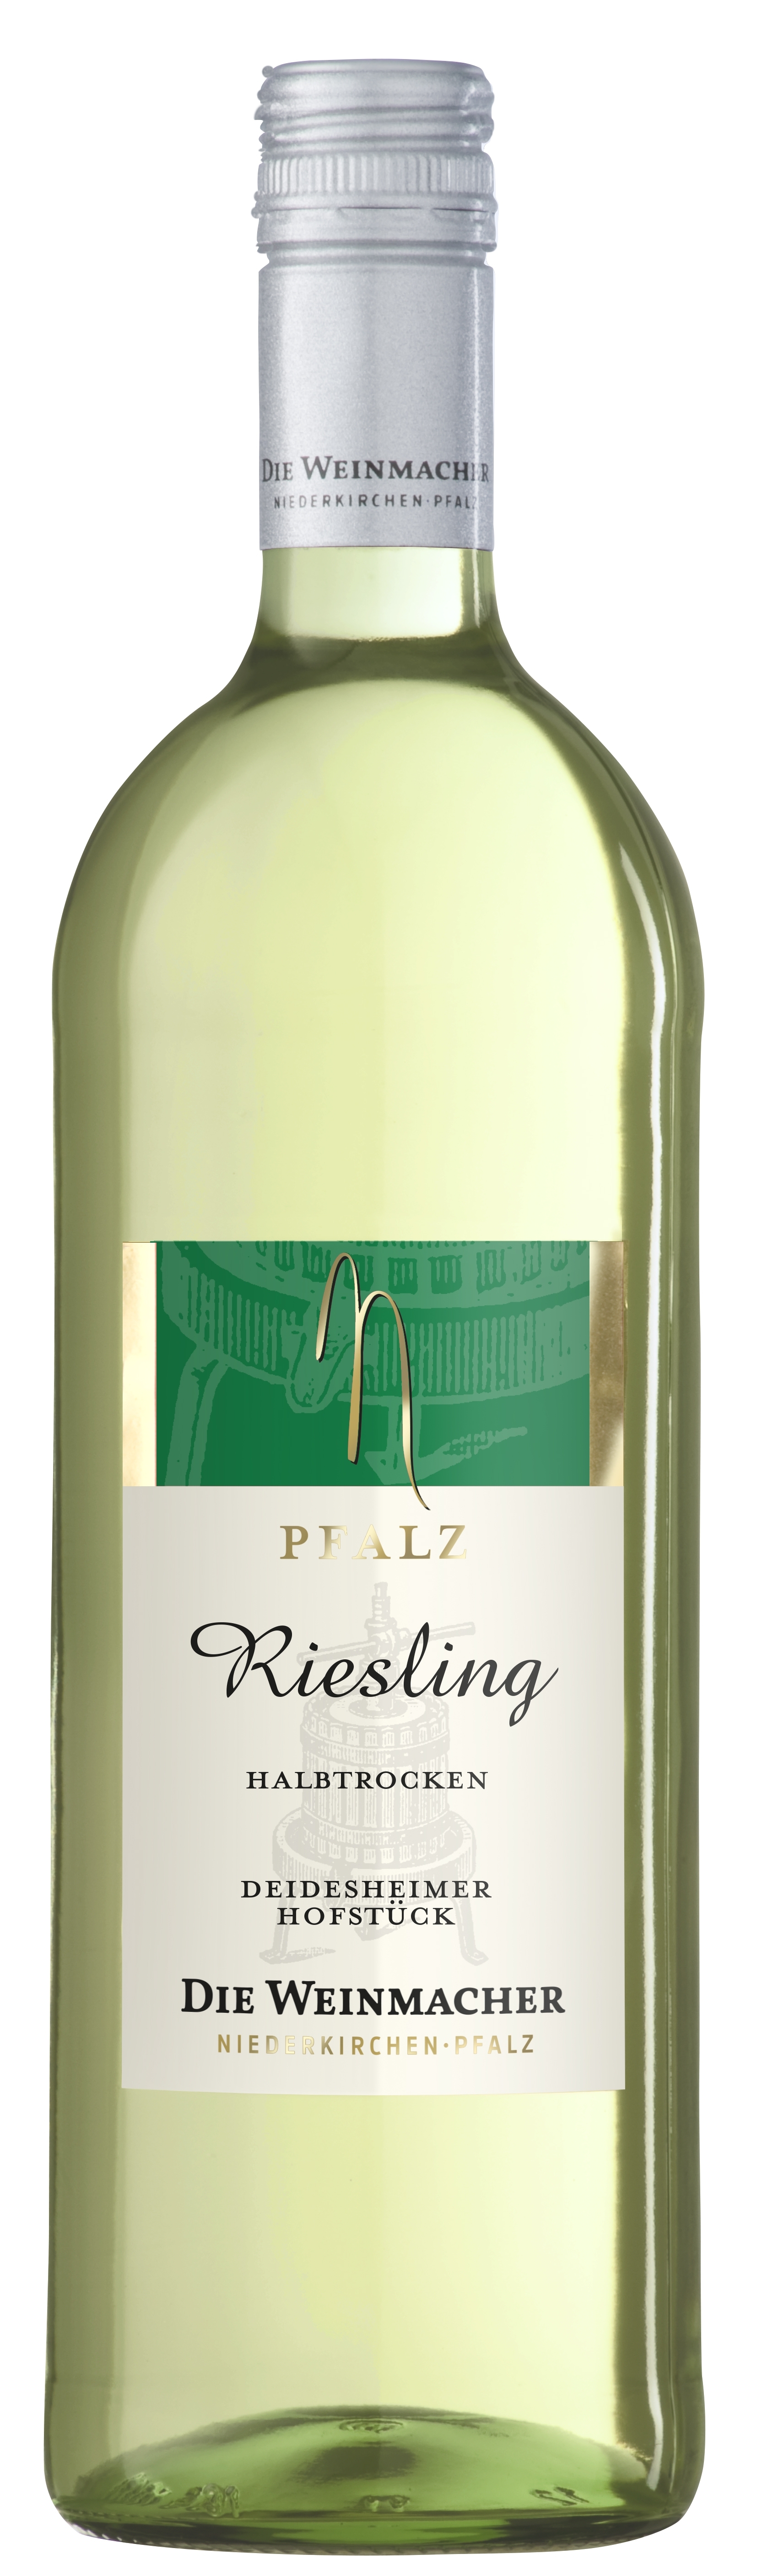 wein.plus Find+Buy: The wines of members | wein.plus our Find+Buy